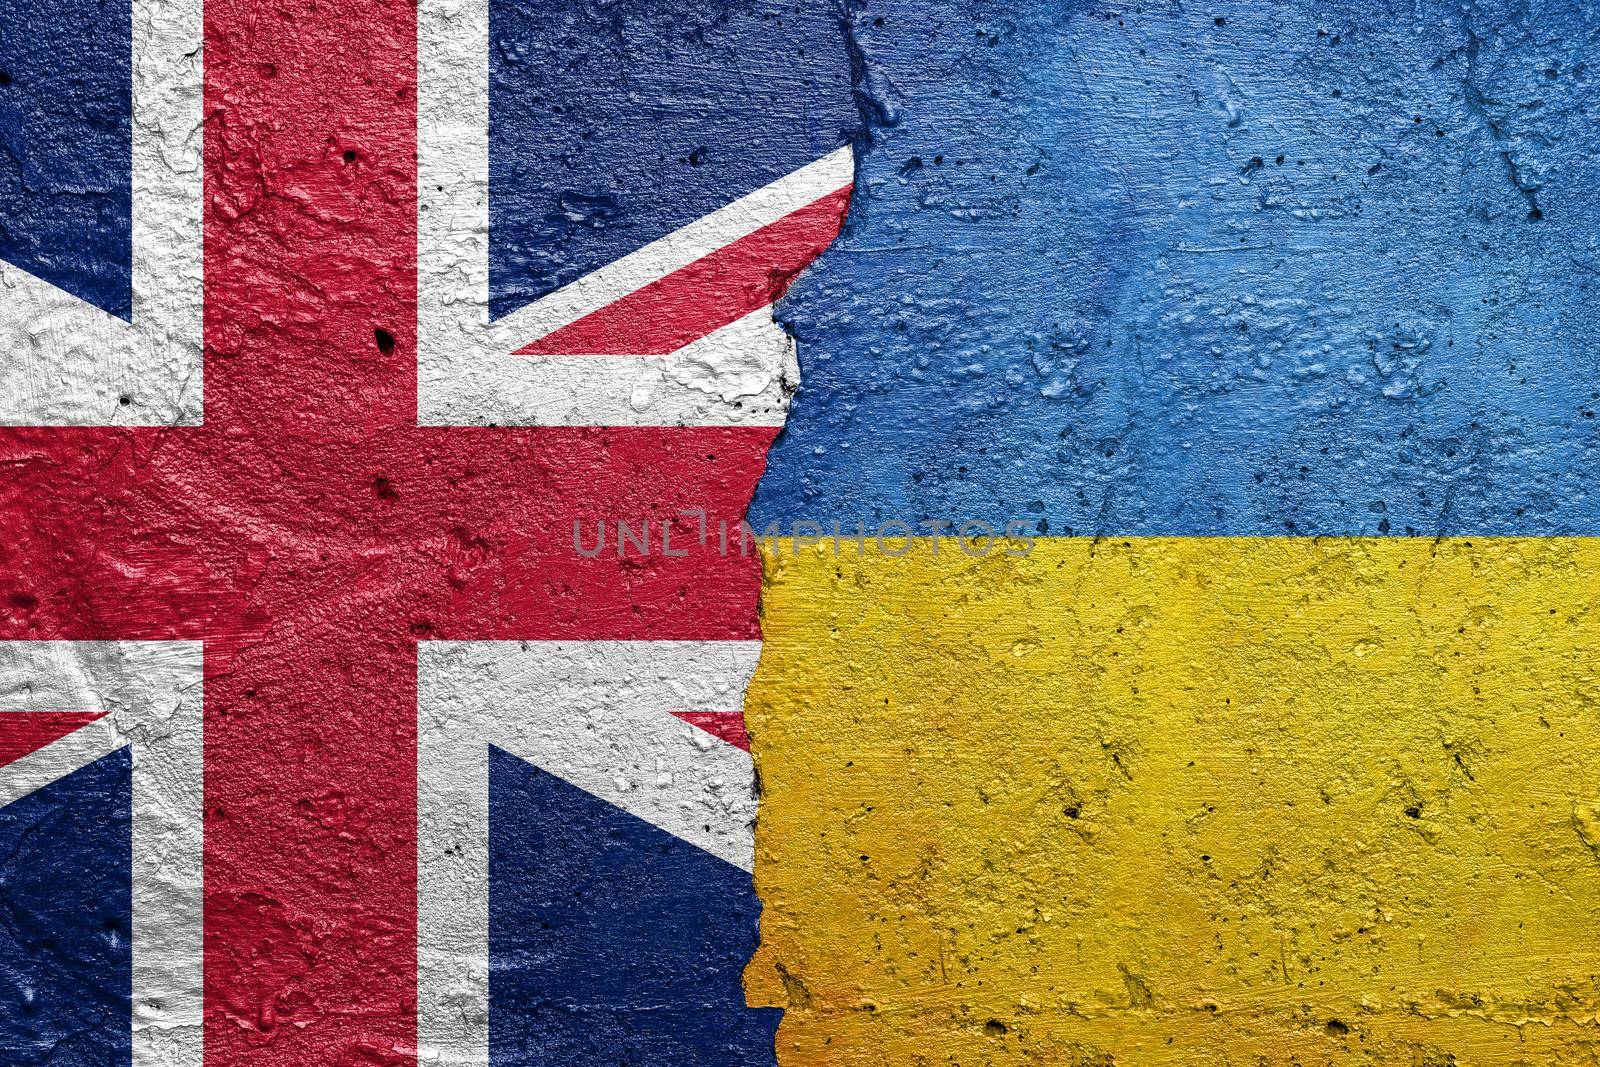 United Kingdom England and Ukraine flags - Cracked concrete wall painted with a UK flag on the left and a Ukrainian flag on the right